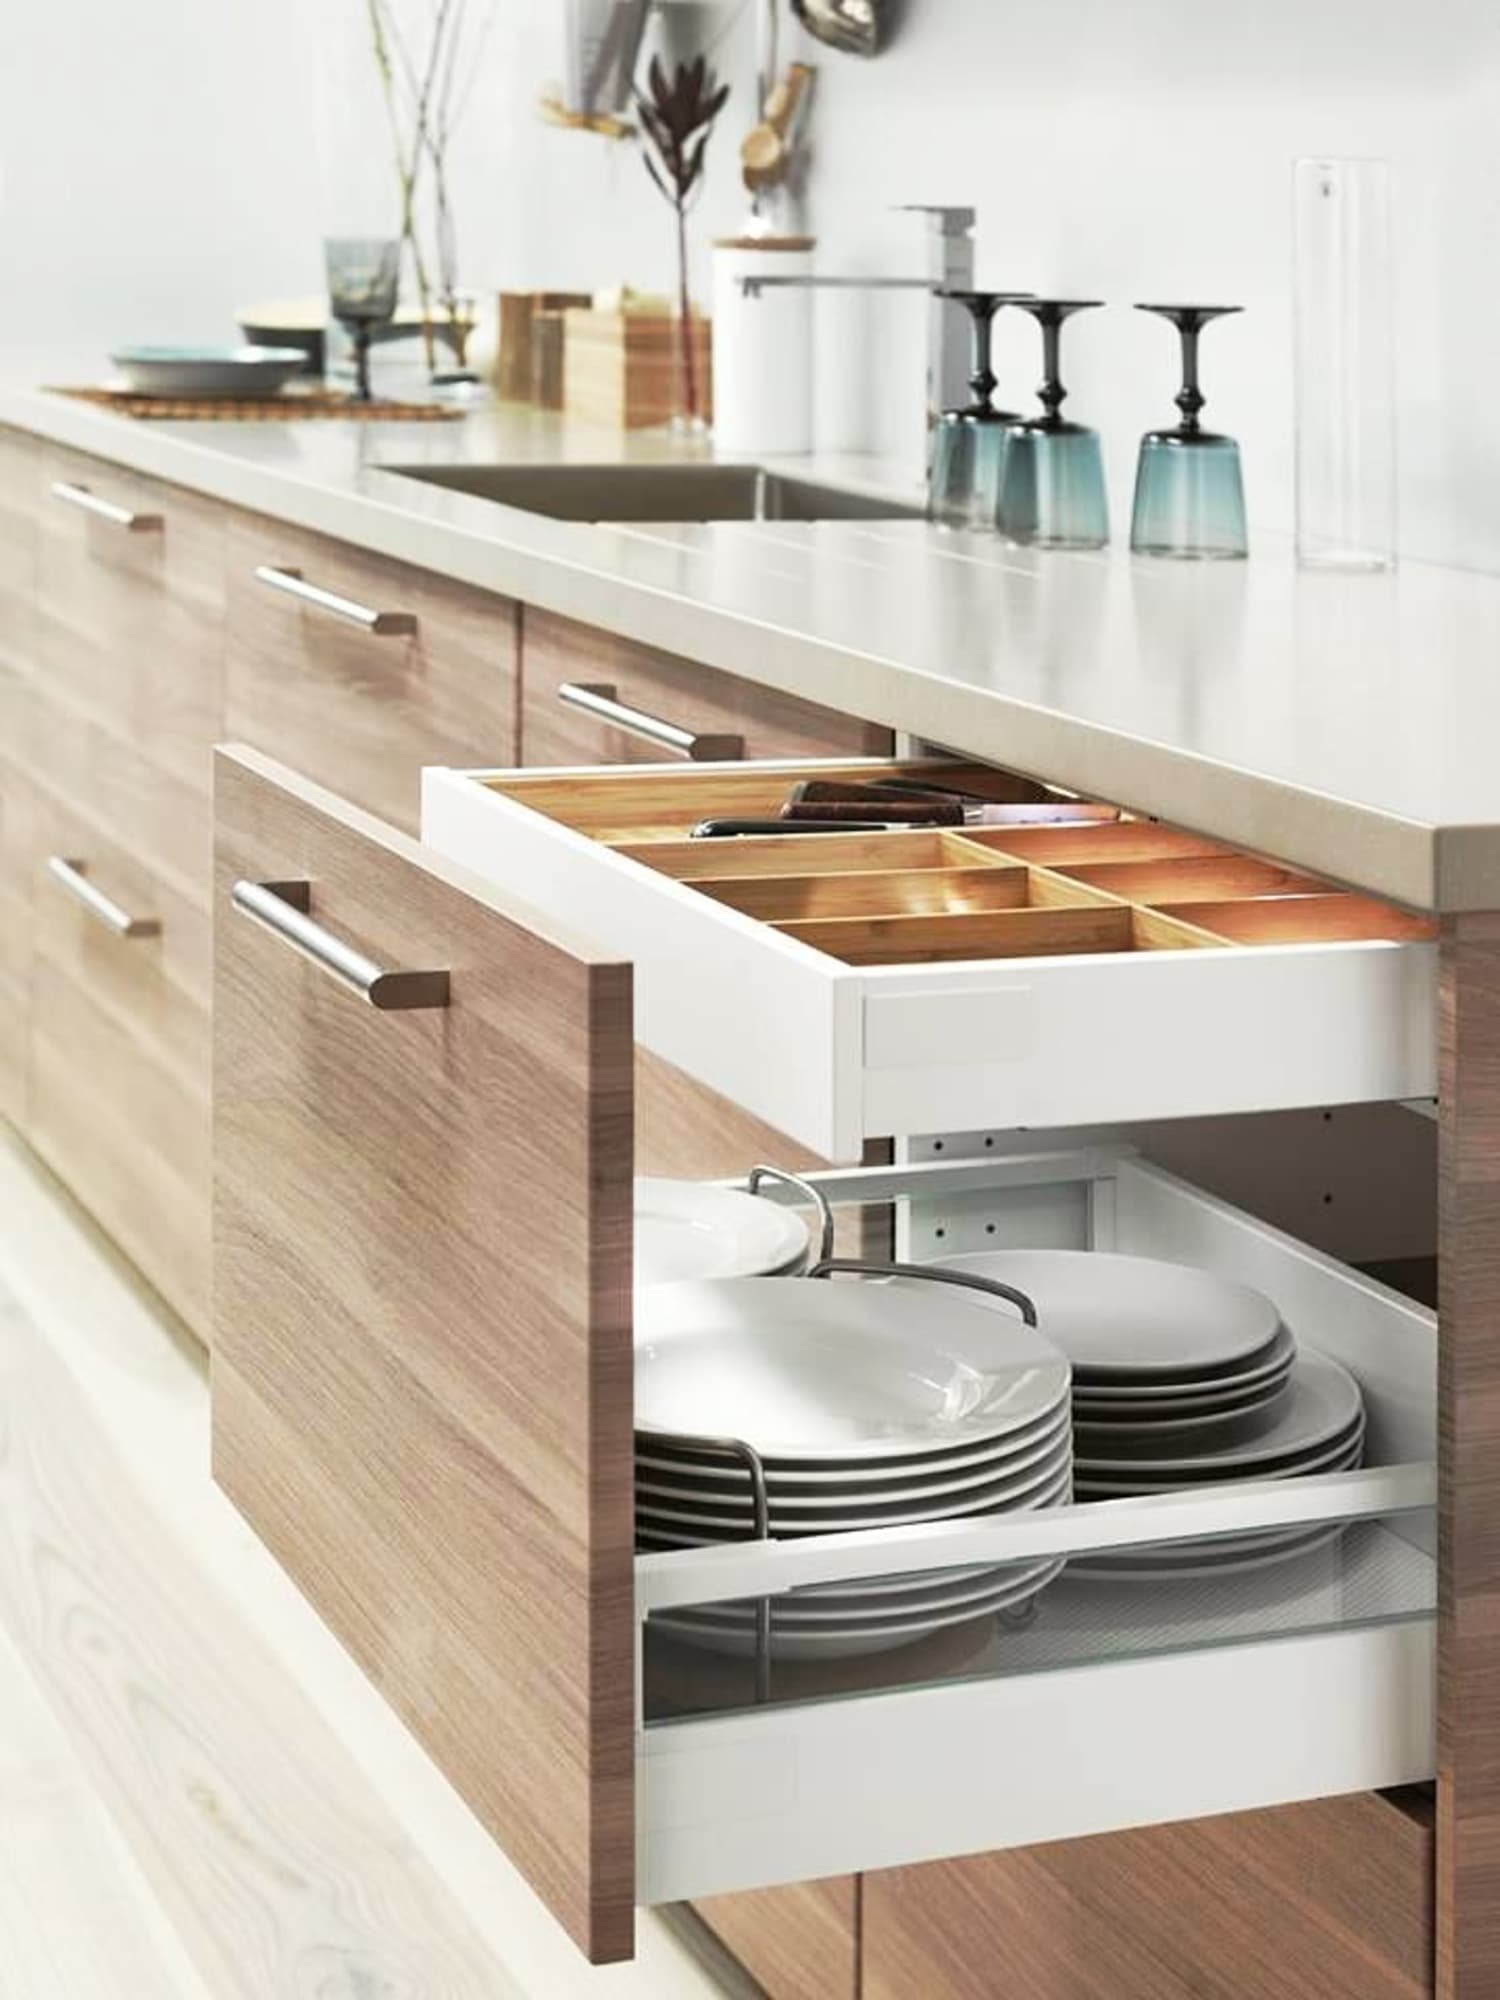 ikea is entirely transforming their cooking area closet system